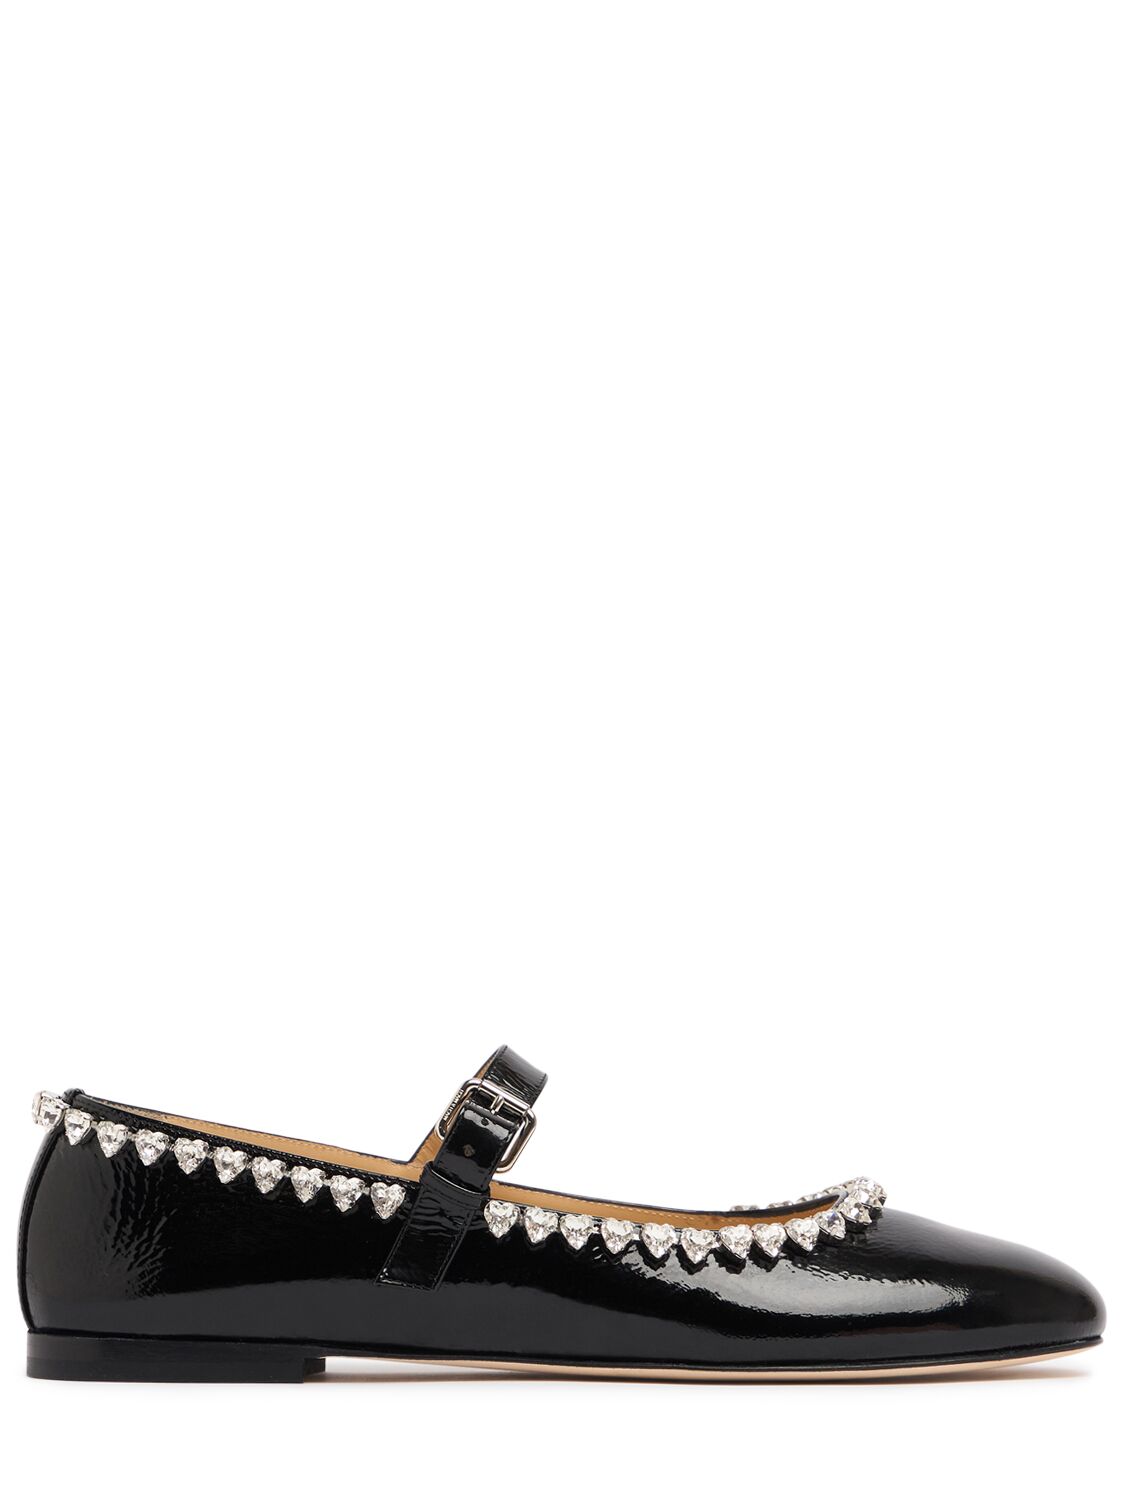 Mach & Mach 10mm Audrey Patent Leather Mary Janes In Black